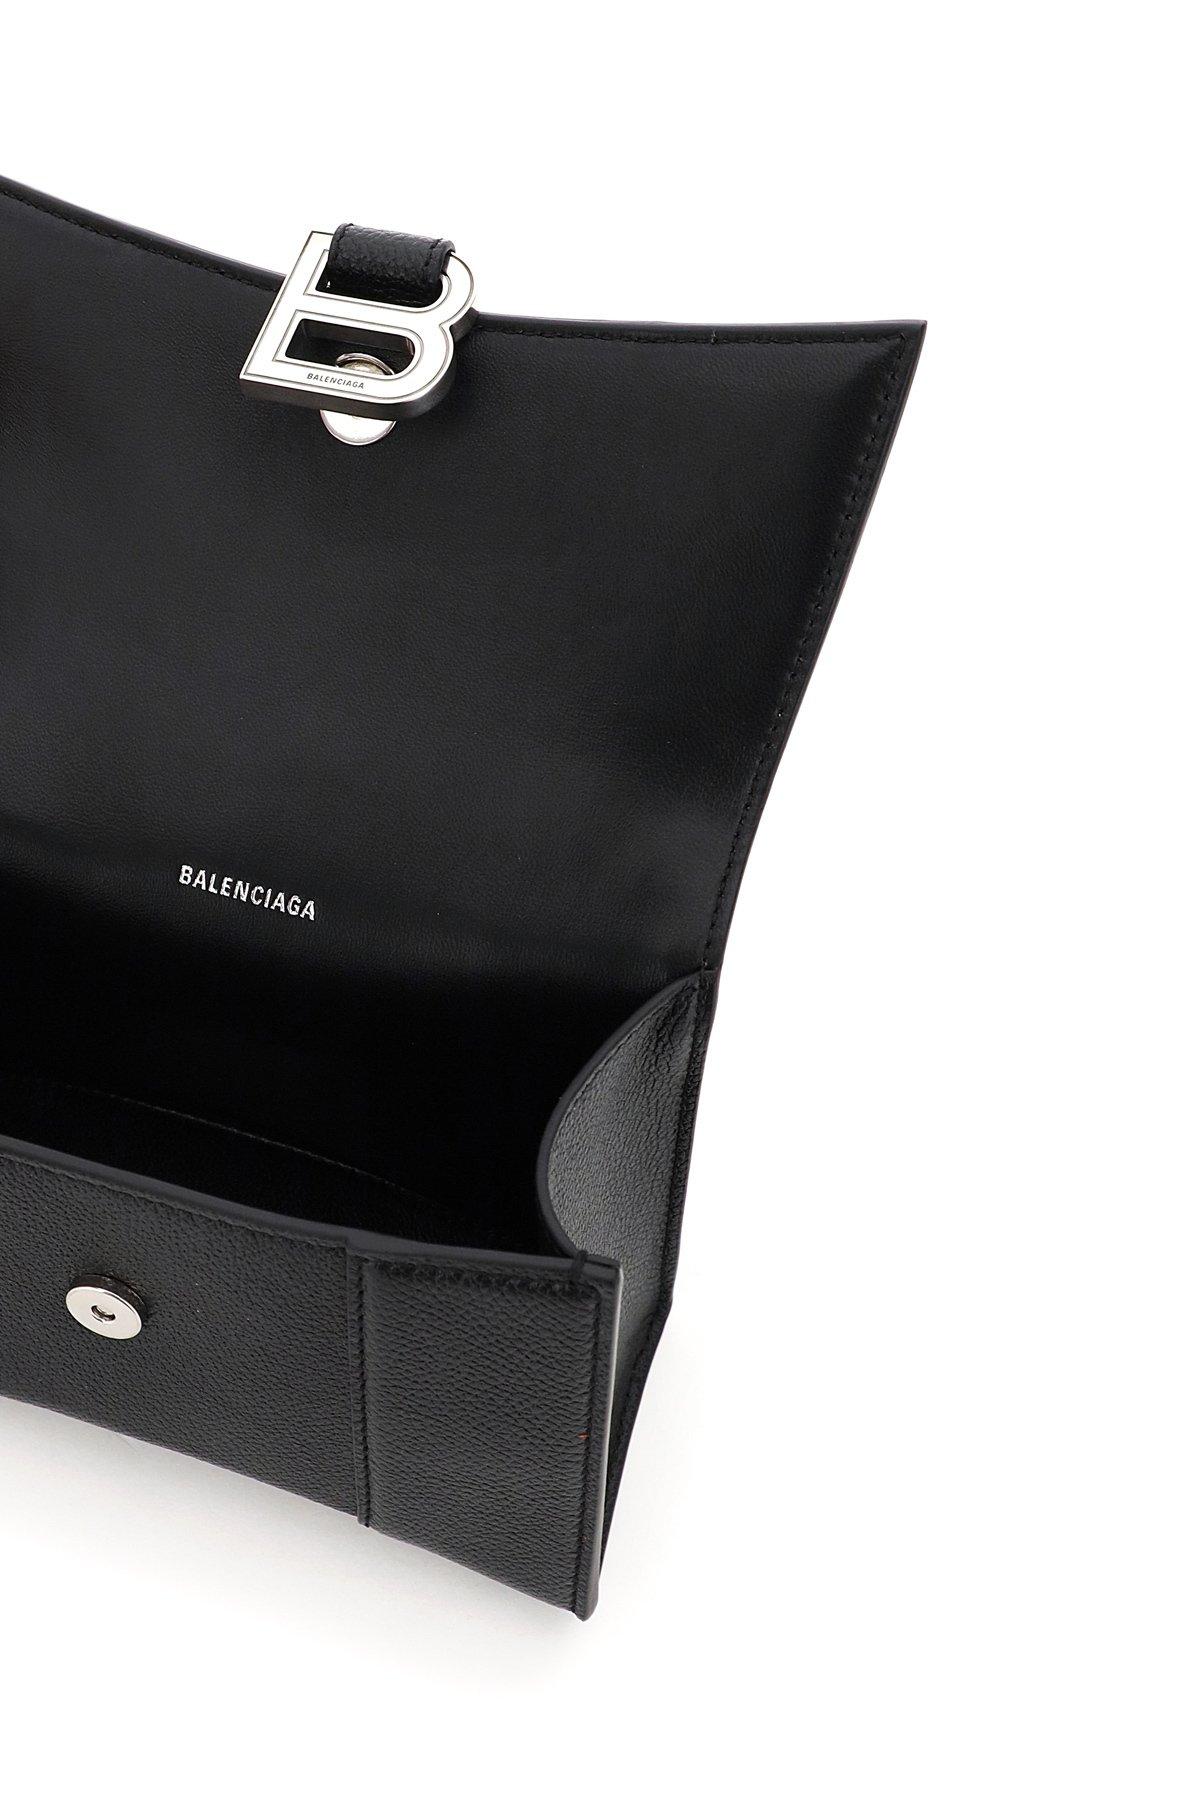 BALENCIAGA 2021 Hourglass XS Handle Bag for Sale in Peck Slip, NY